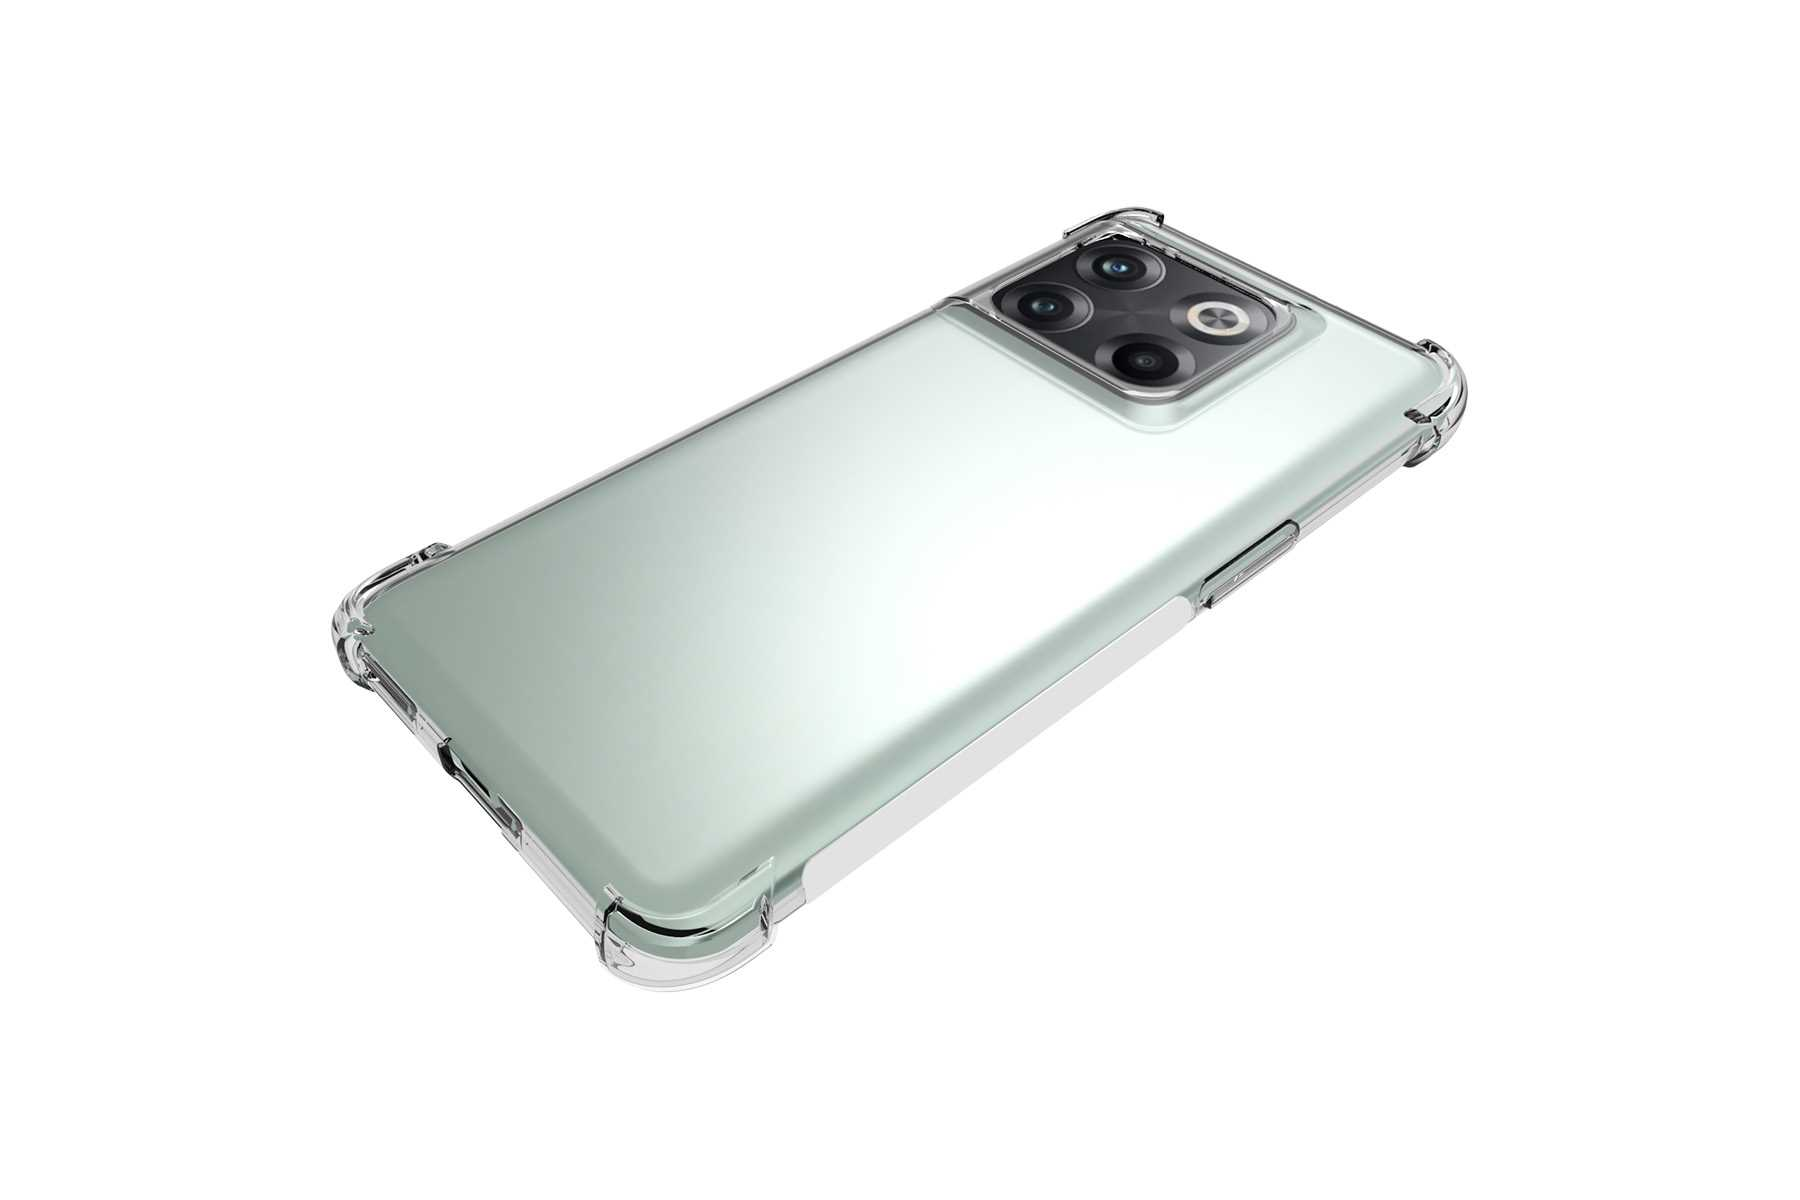 MTB MORE ENERGY Clear 5G, Backcover, Case, Transparent Armor OnePlus, 10T